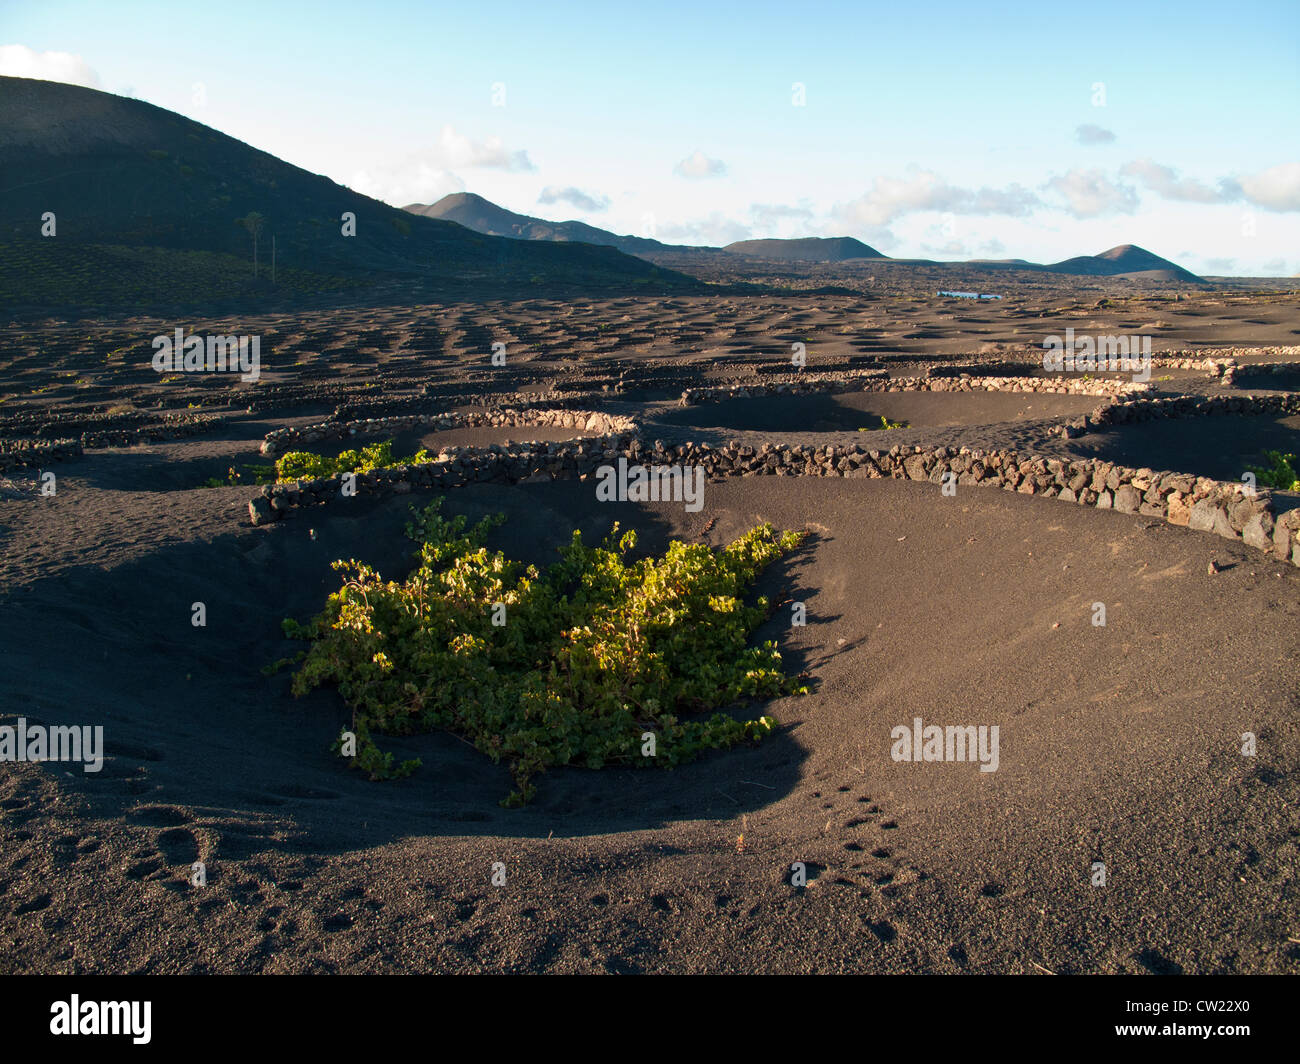 winegrowing on the Island of Lanzarote, Canary Islands, Spain Stock Photo